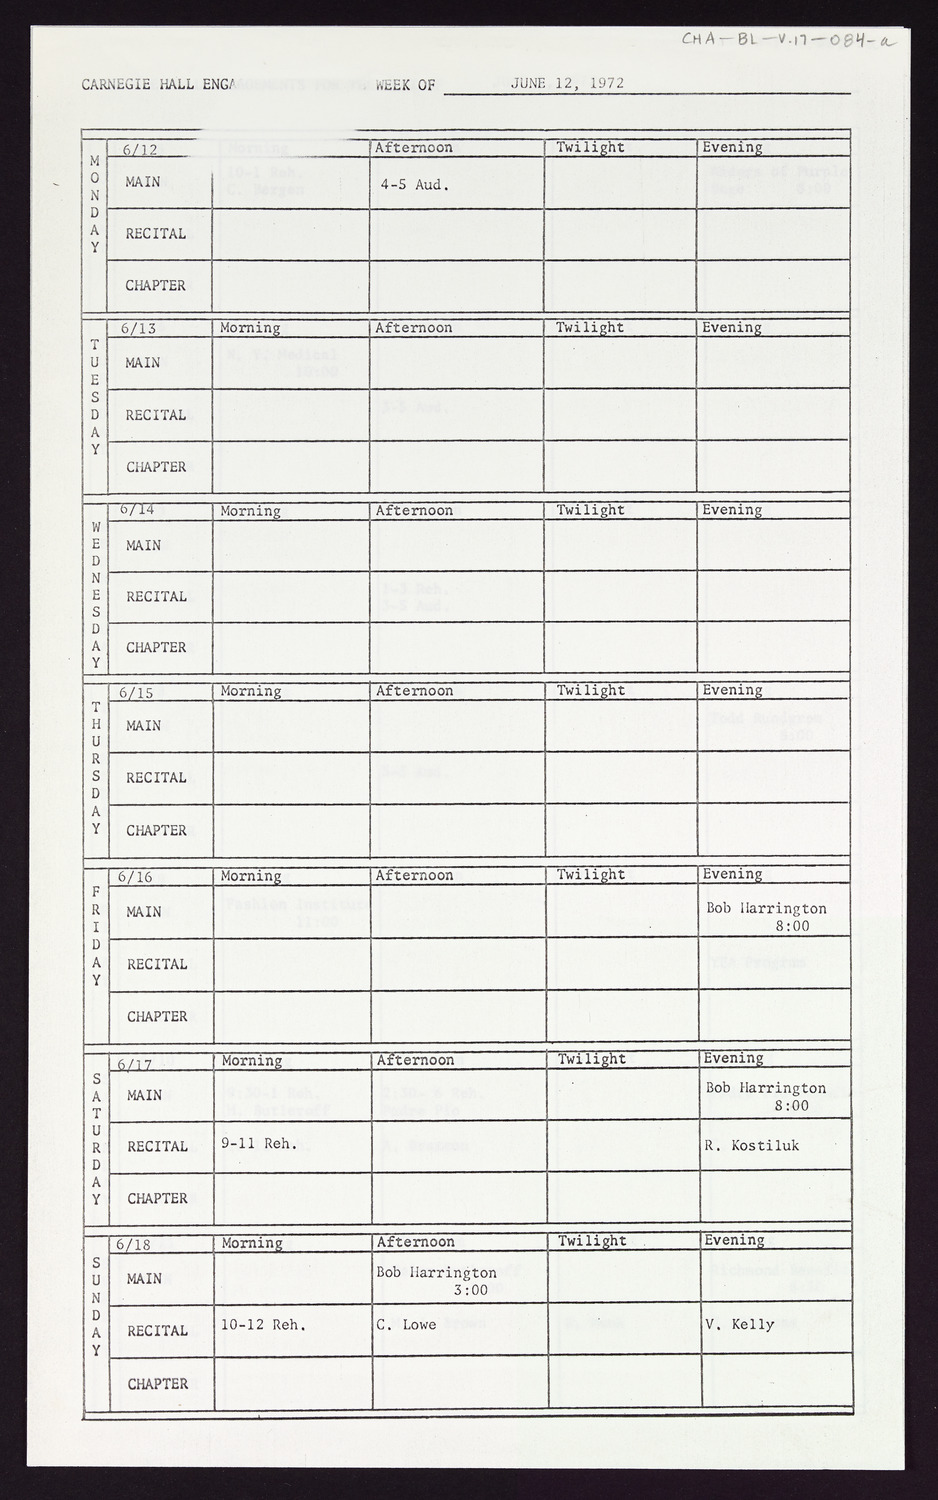 Carnegie Hall Booking Ledger, volume 17, page 84a